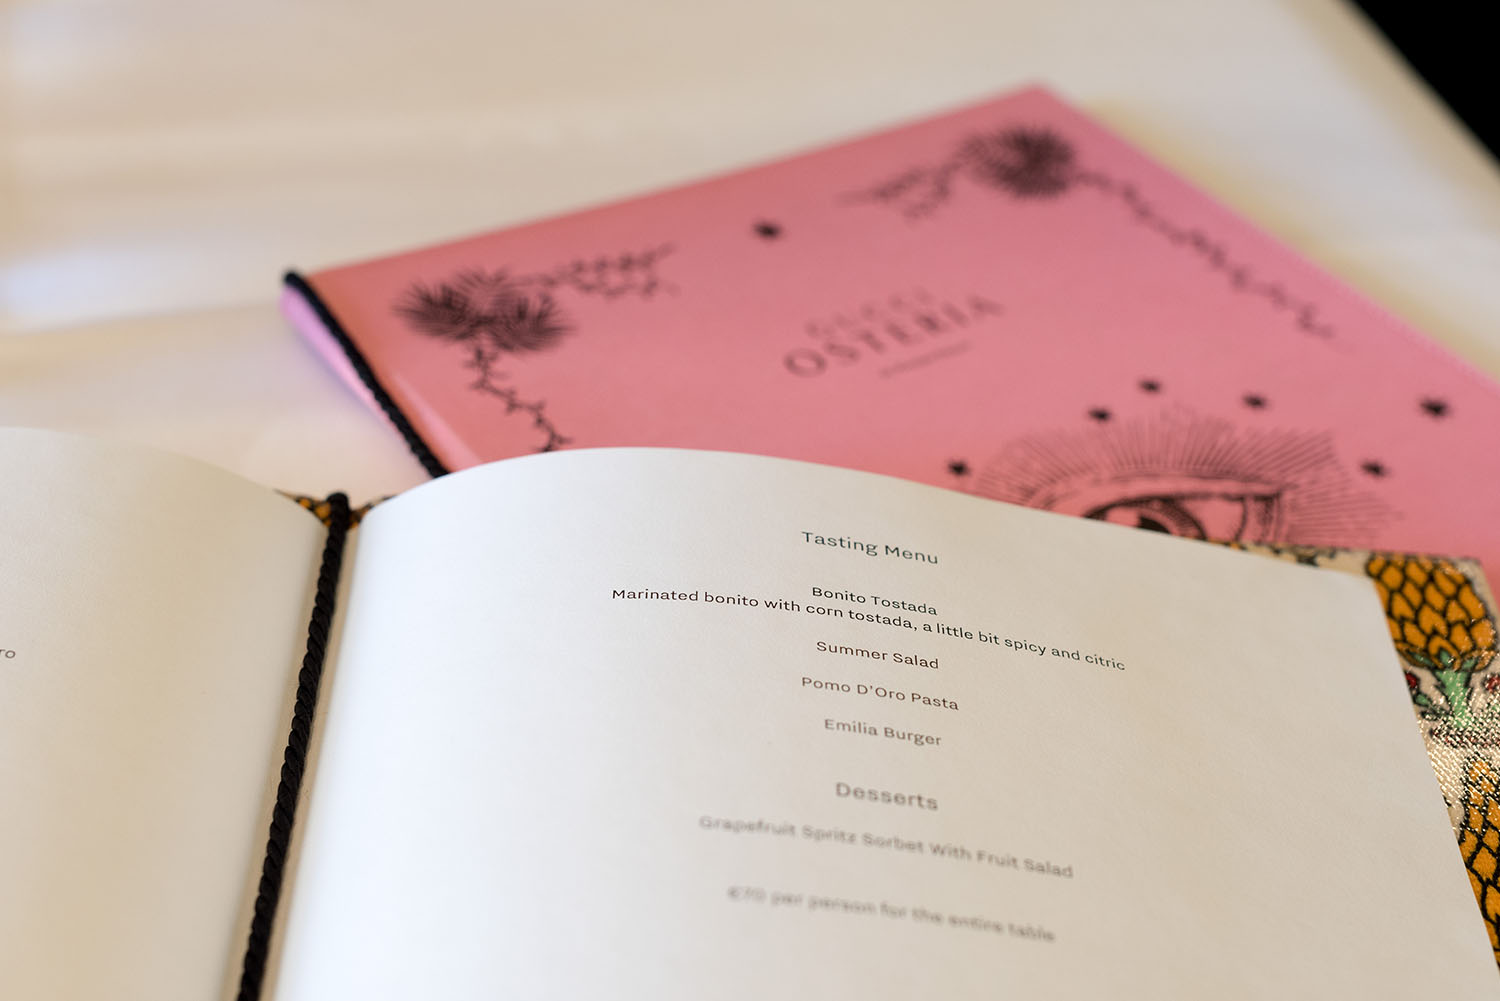 A copy of the menu at the Gucci Osteria by Massimo Bottura, as photographed by top Winnipeg travel blogger Cee Fardoe of Coco & Vera